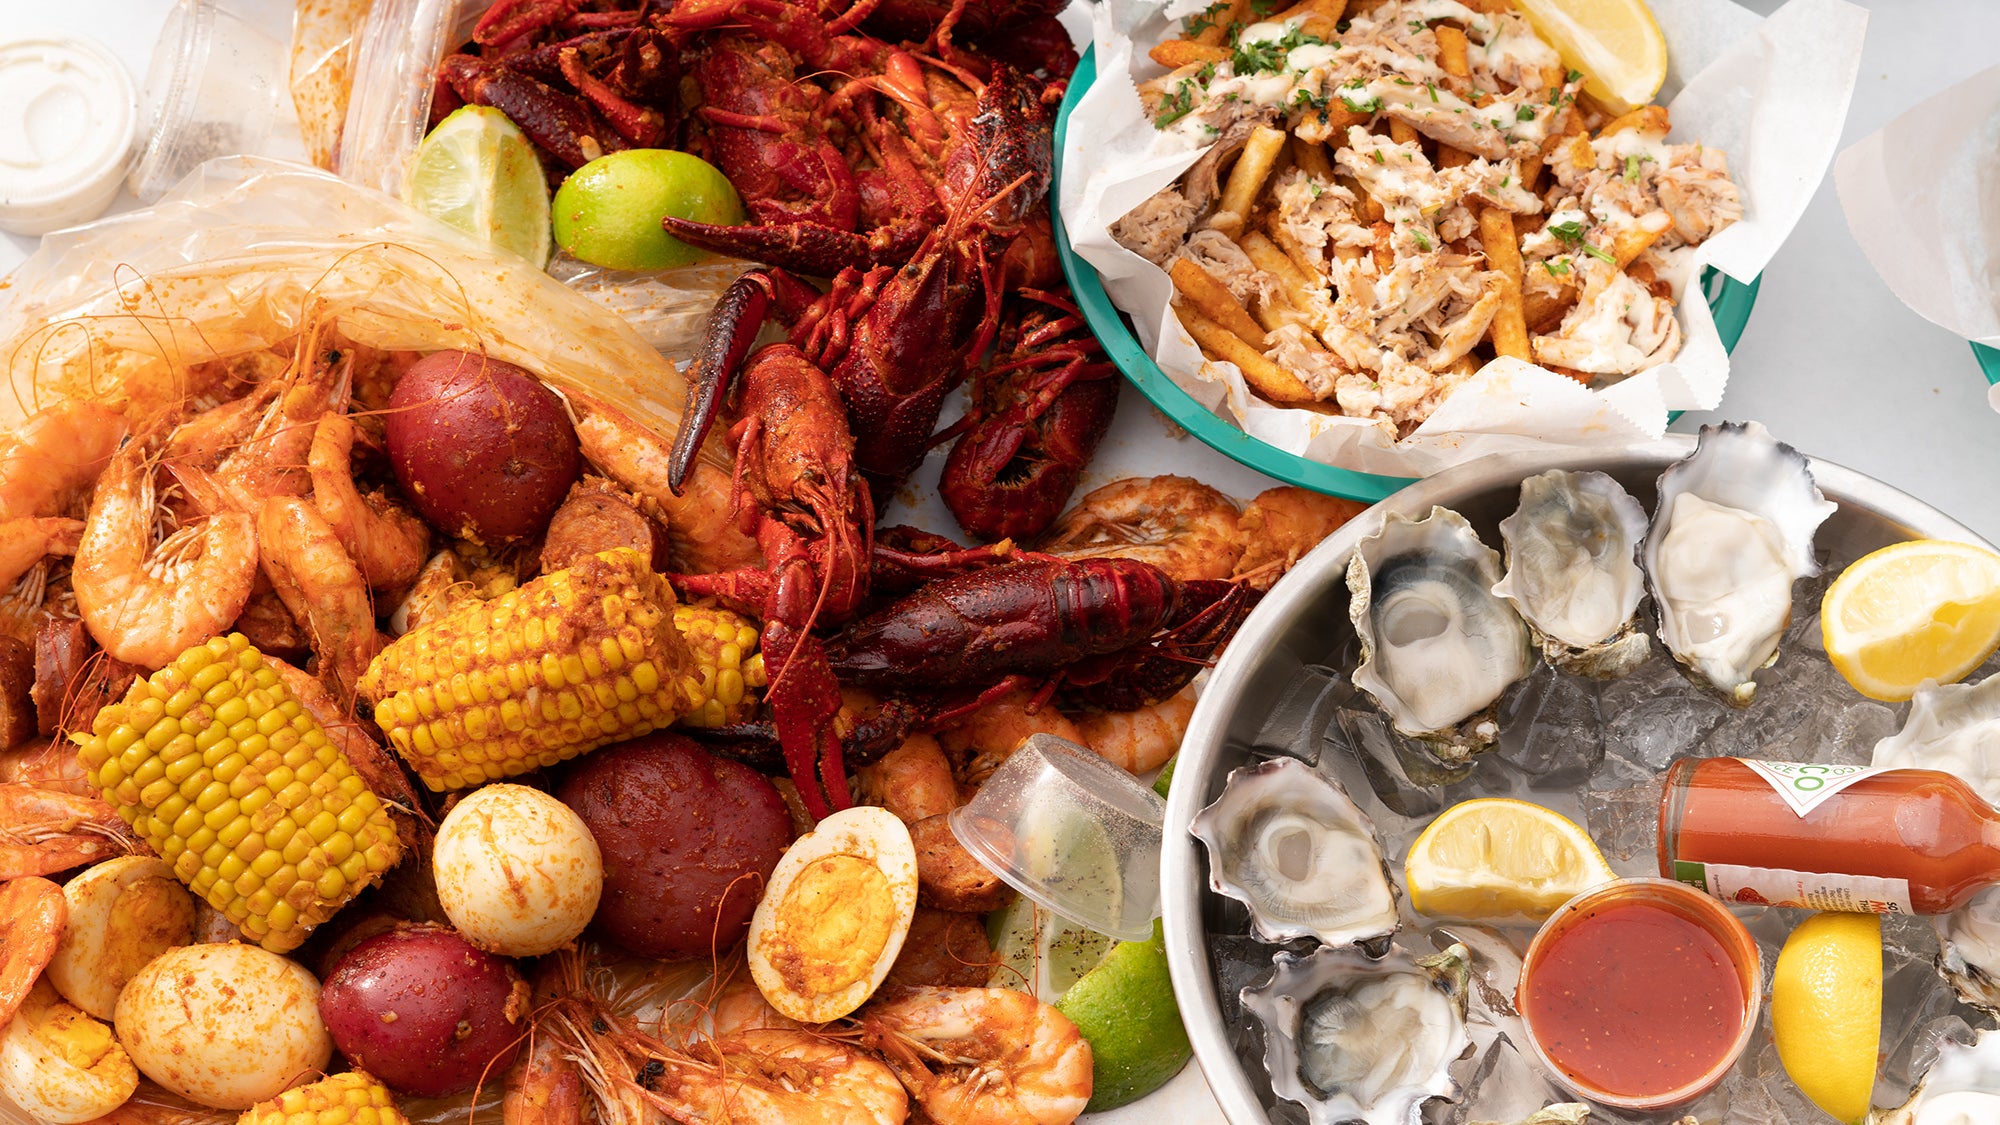 Seafood spread at The Boiling Crab